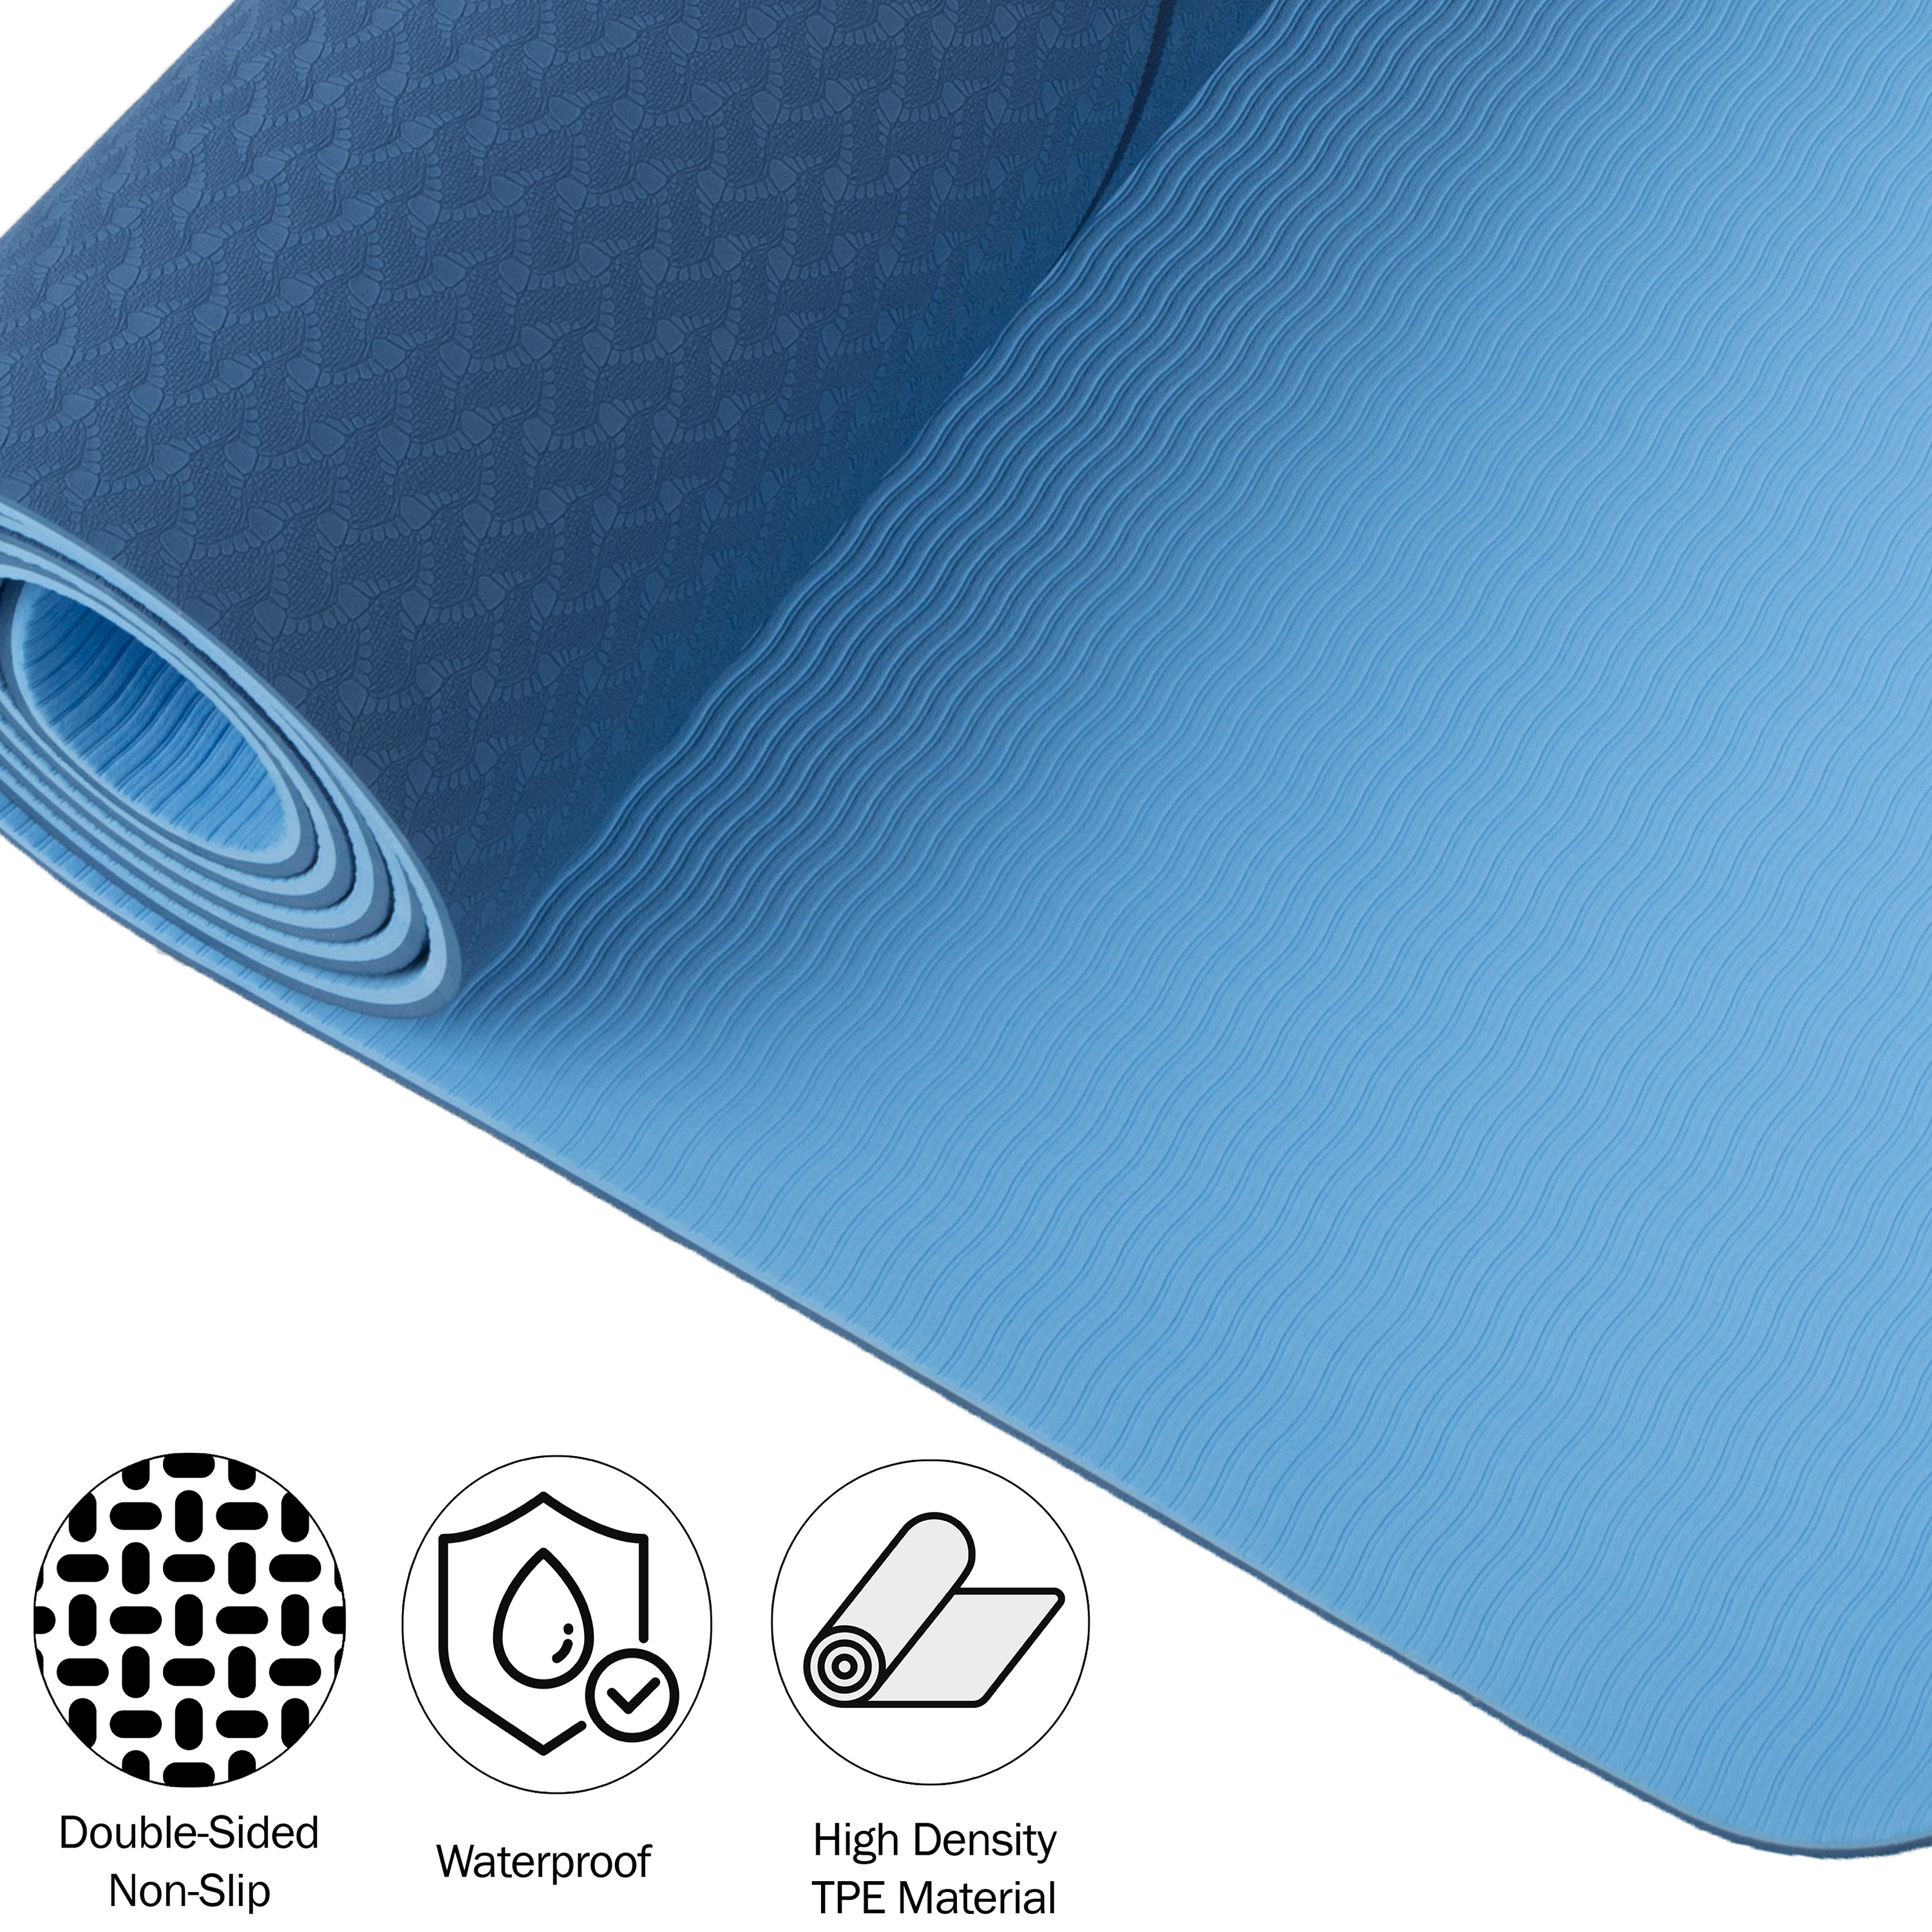 Yoga Mat Portable With Carry Strap 72 X 24 Inches High Density Tear Resistant Blue